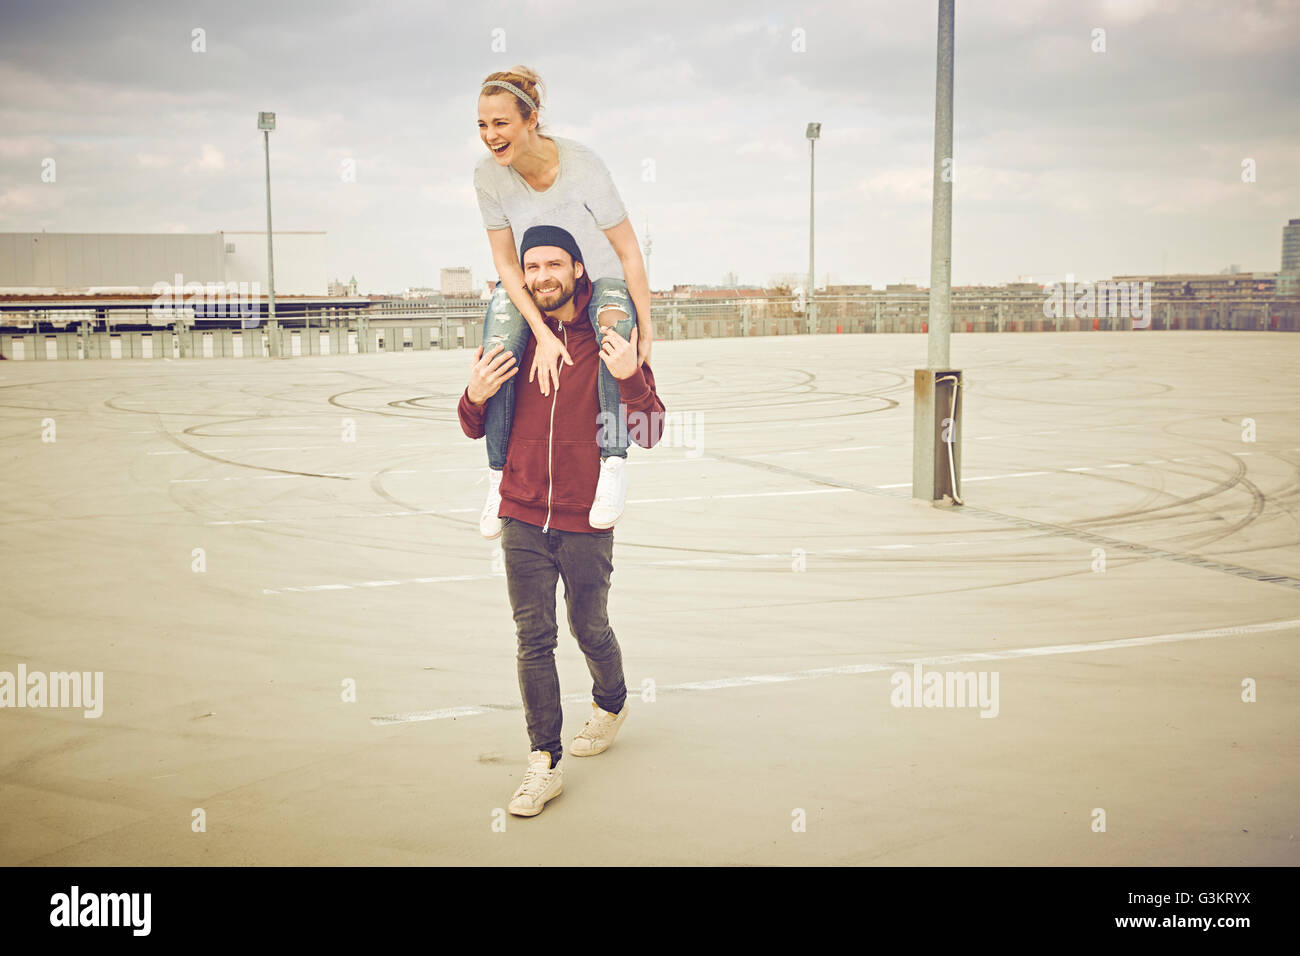 Mid adult man giving shoulder ride to girlfriend on rooftop parking lot ...